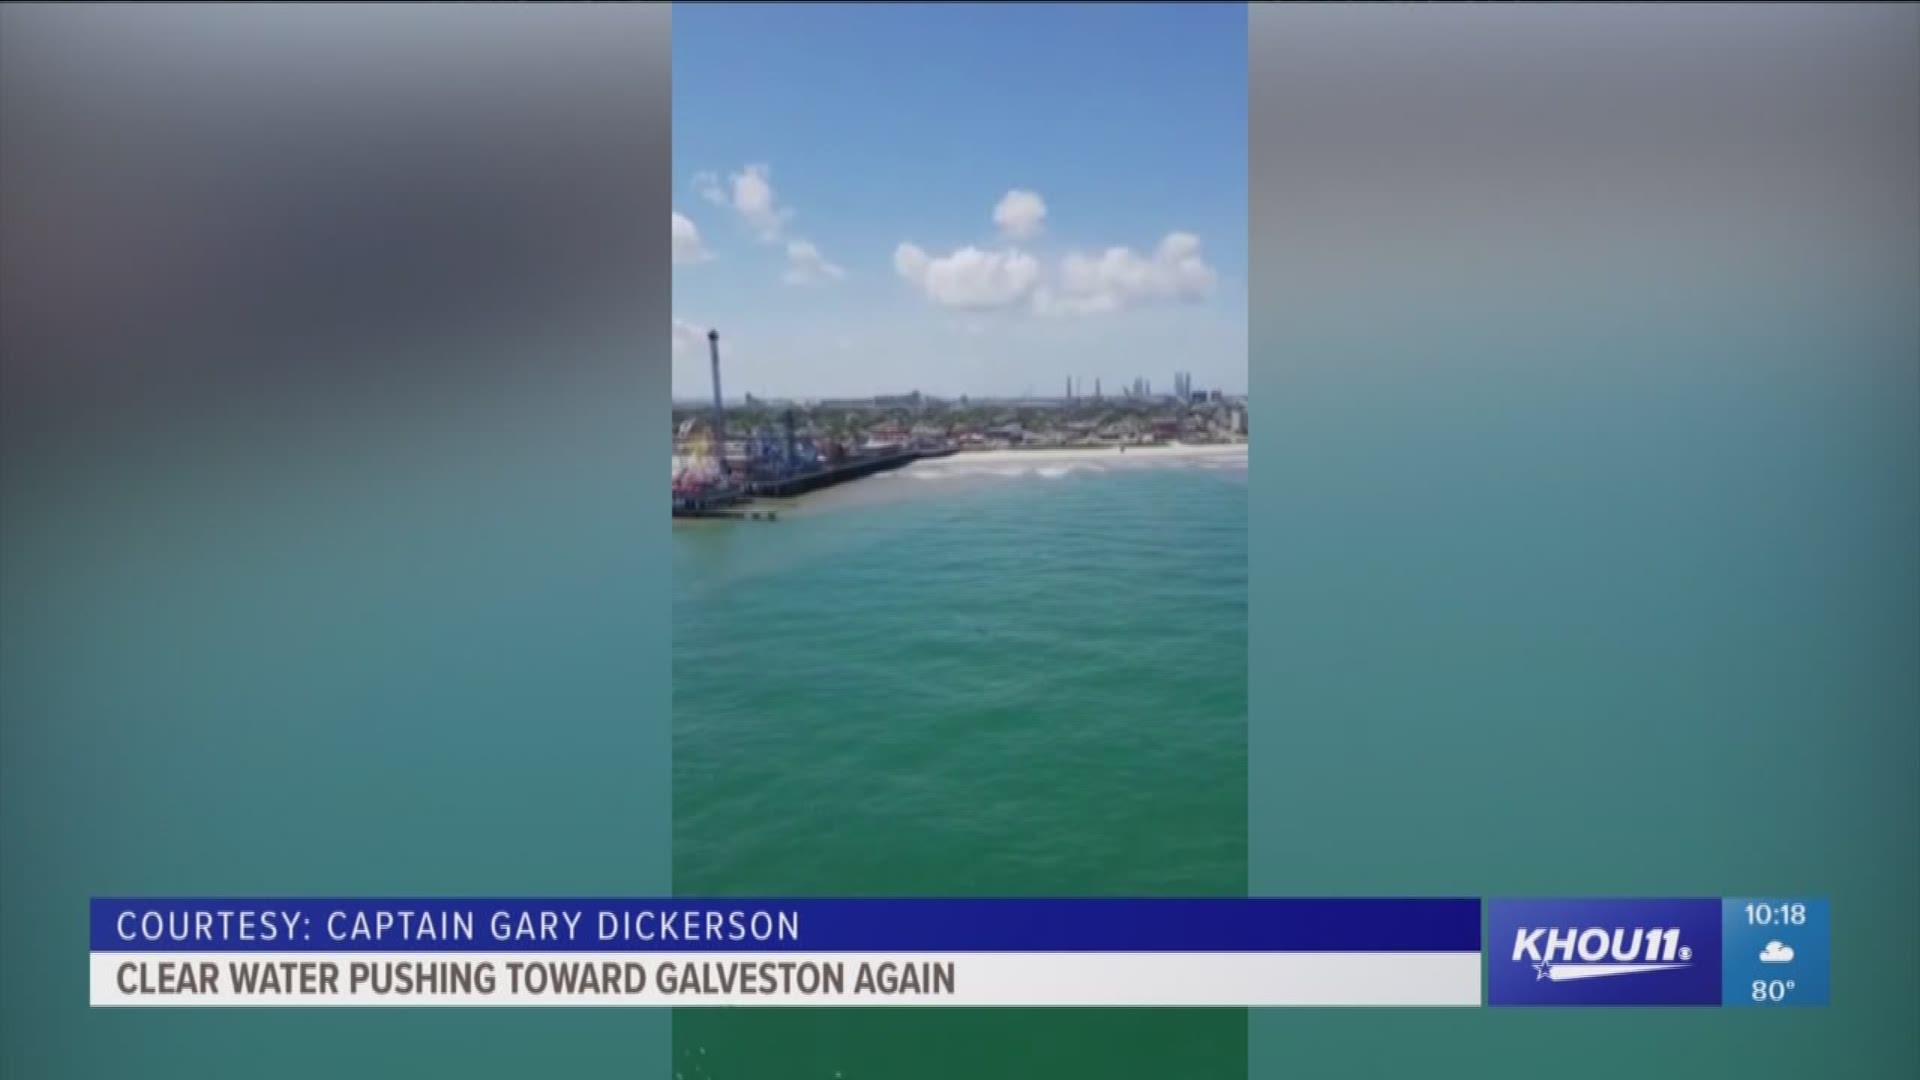 Clear water seems to be pushing toward Galveston again, according to a viewer video.